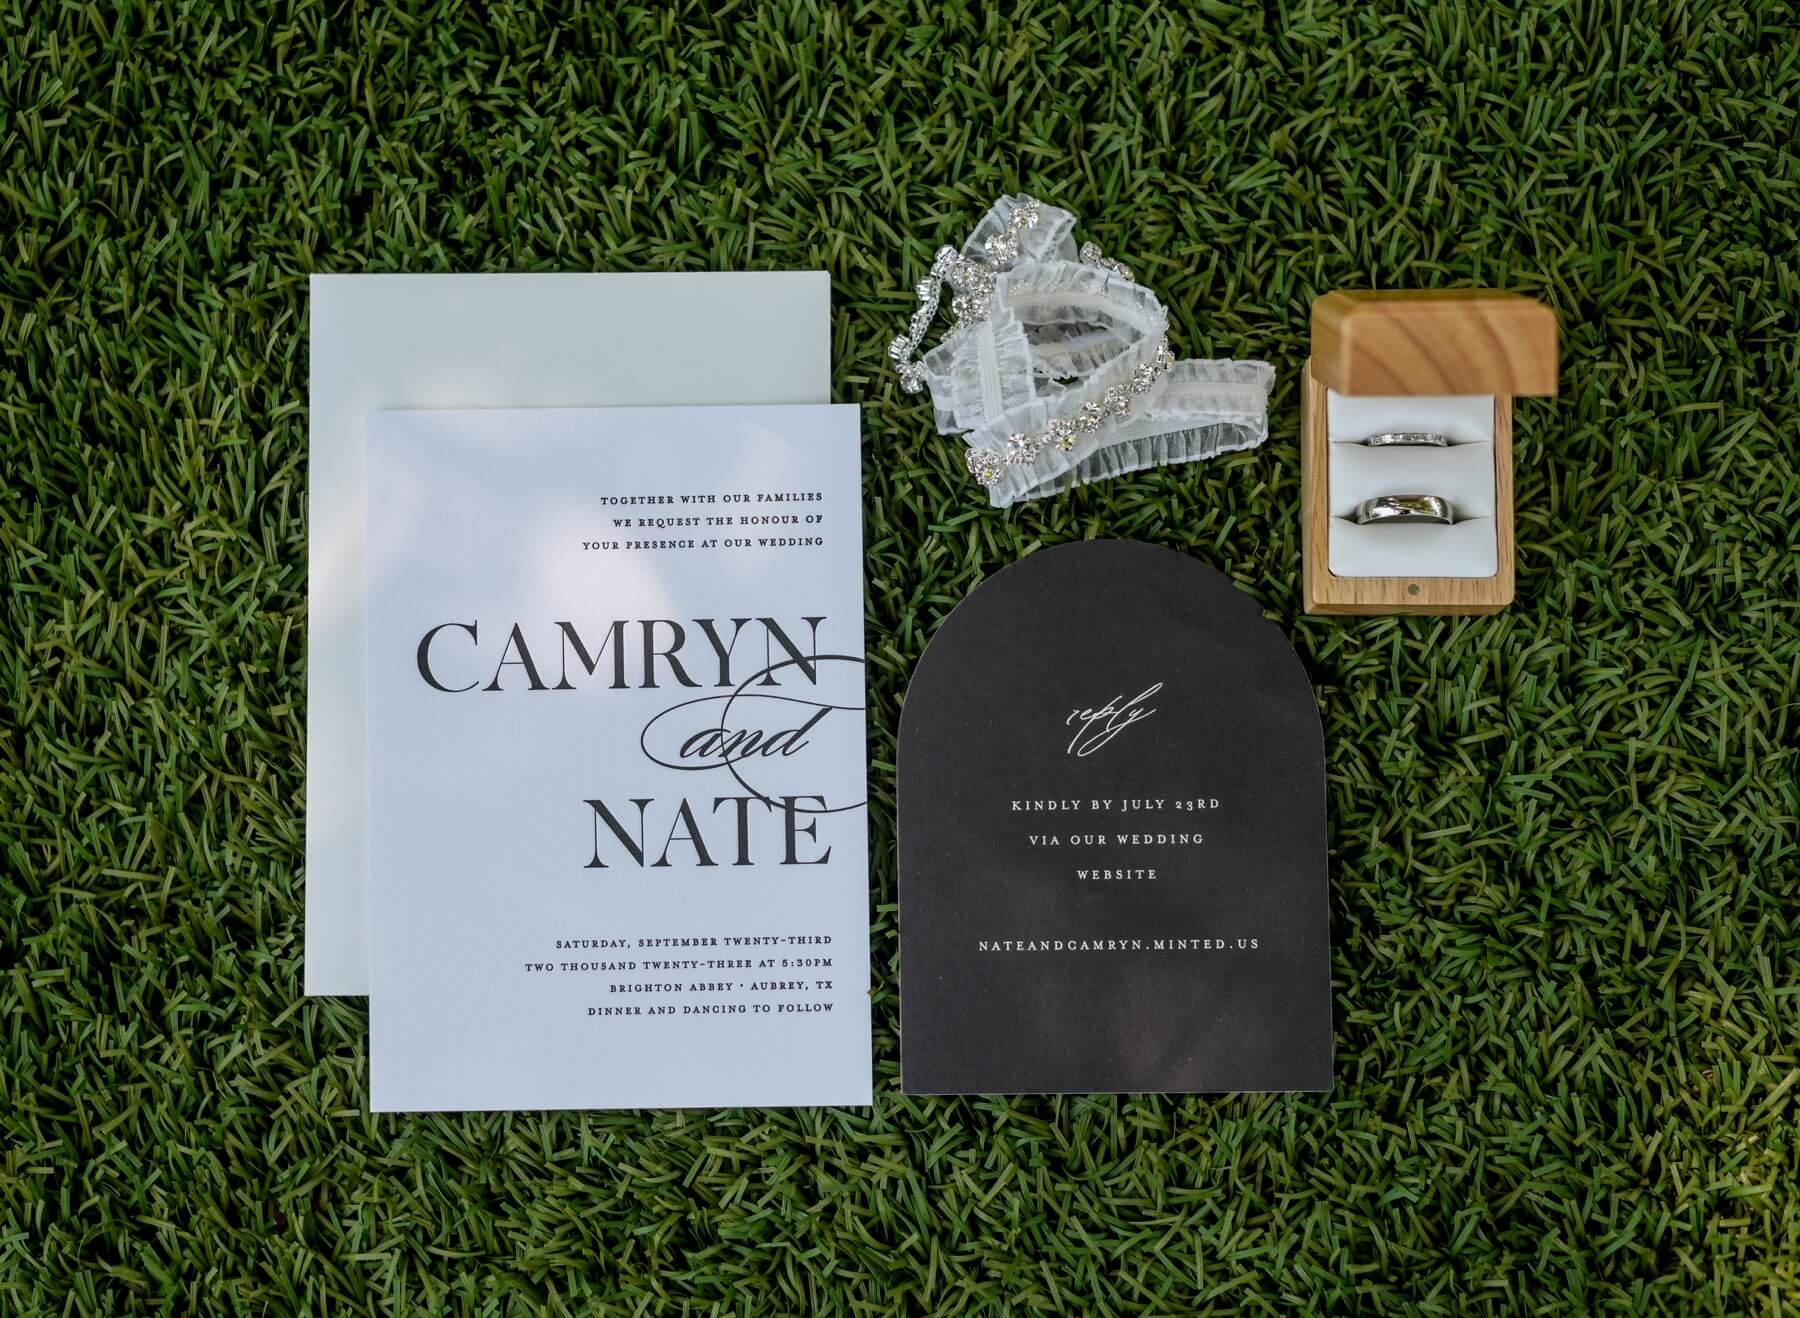 White and black wedding invitation with wedding rings and garter on green grass